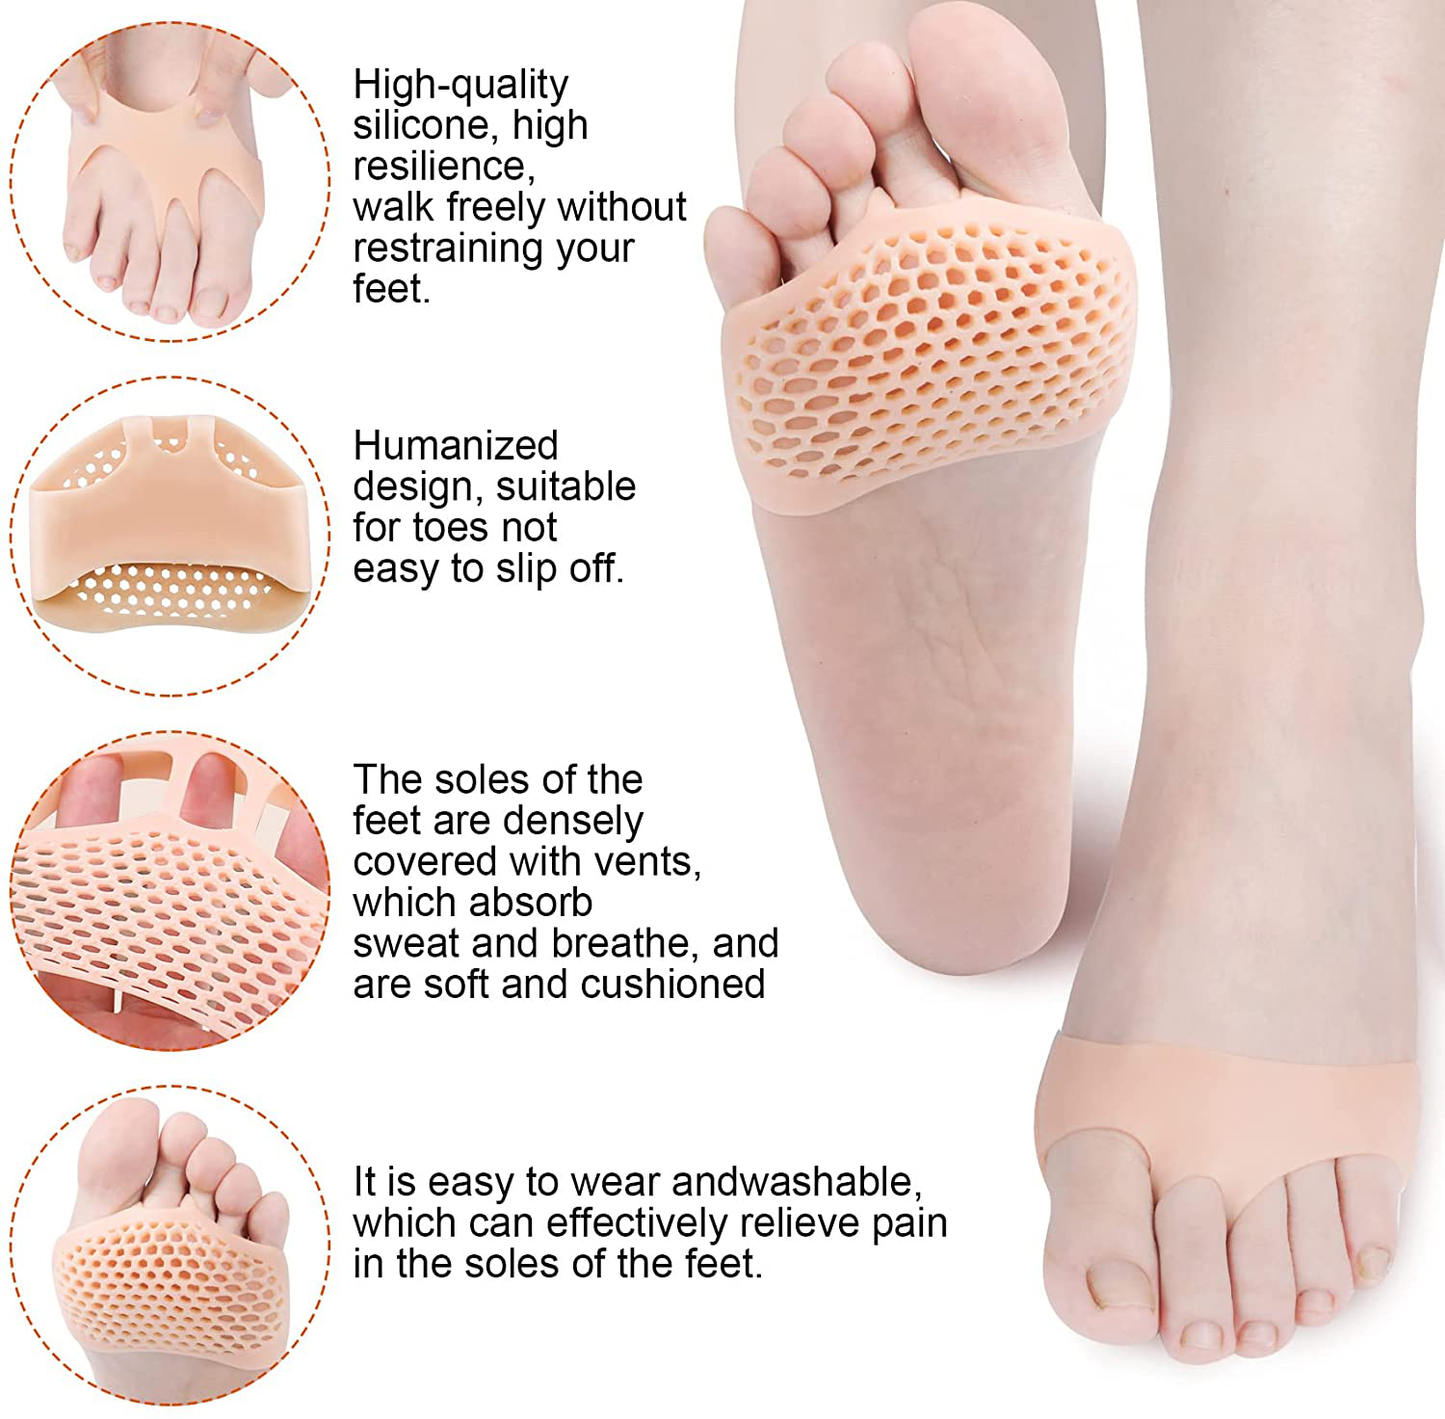 PAGOW 10 Pairs Metatarsal Foot Pads for Women and Men, Soft Silicone Forefoot Pad, Pain Relief Honeycomb Ball of Foot Cushion for Sports Shoes, High Heels, Boots, Canvas Shoes